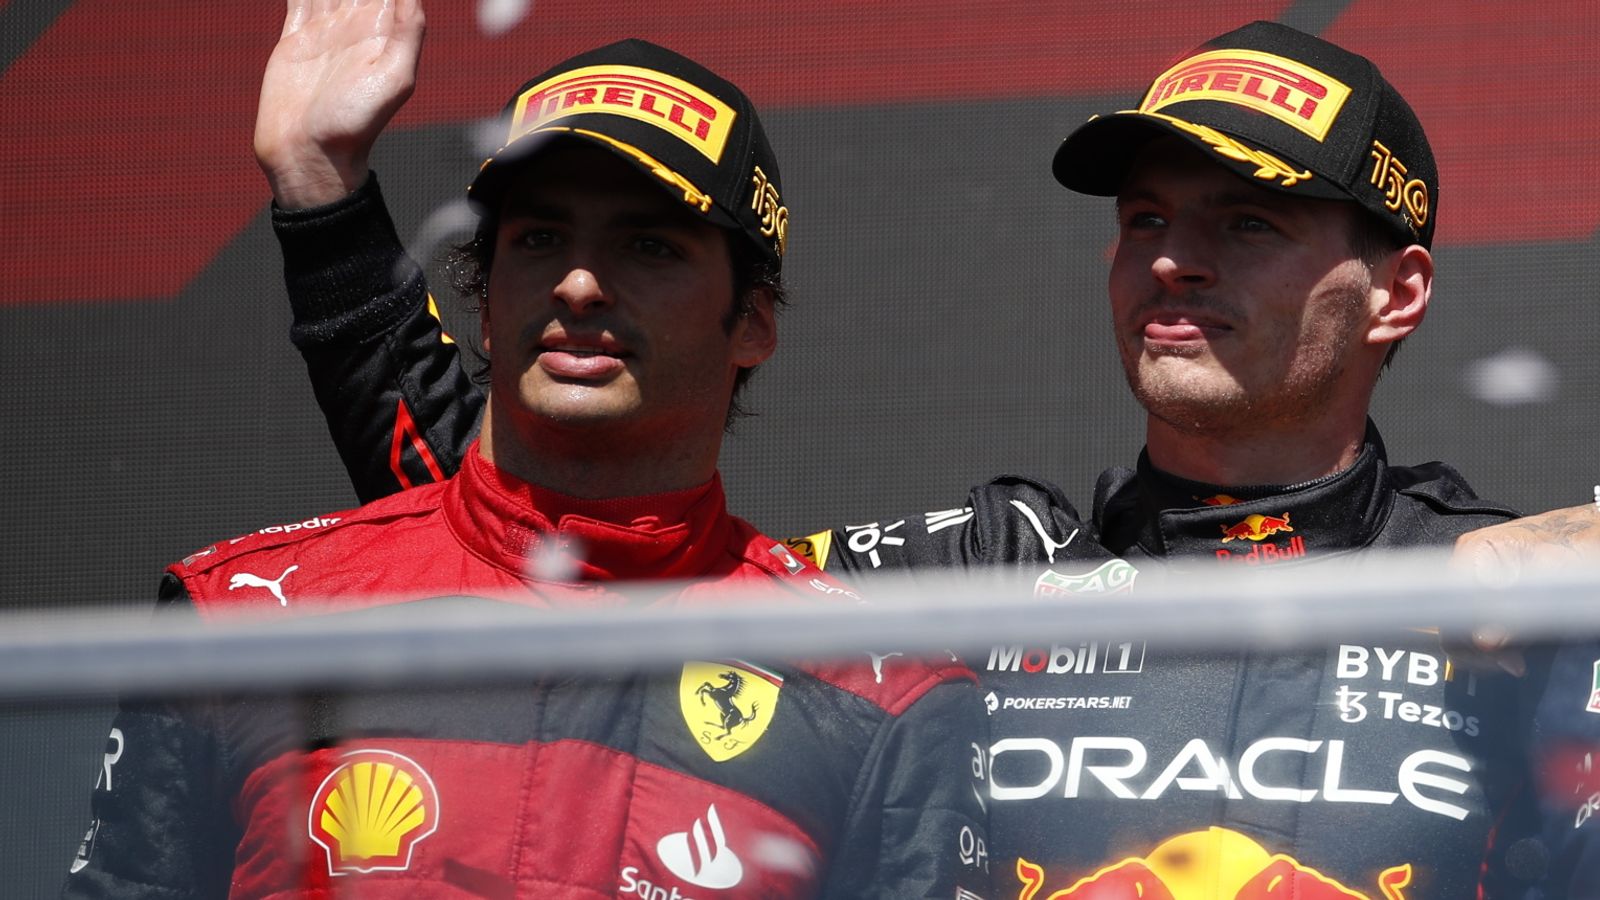 Carlos Sainz says he was fastest guy on track; Ferrari drivers frustrated after Canadian Grand Prix